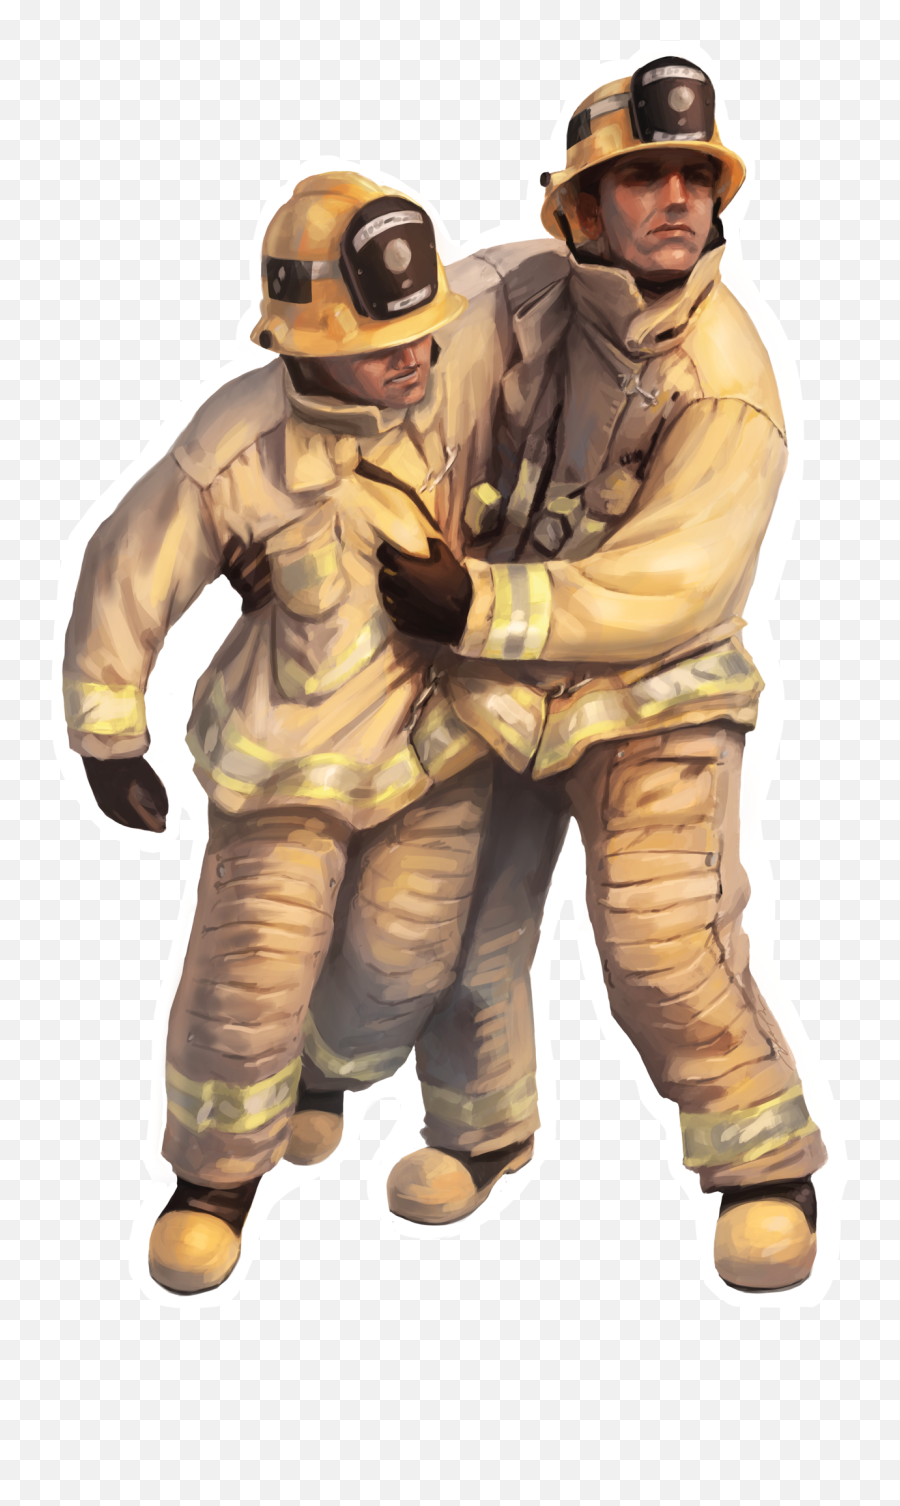 Firefighters Down 36959 - Png Images Pngio Firefighters Png,Firefighter Png